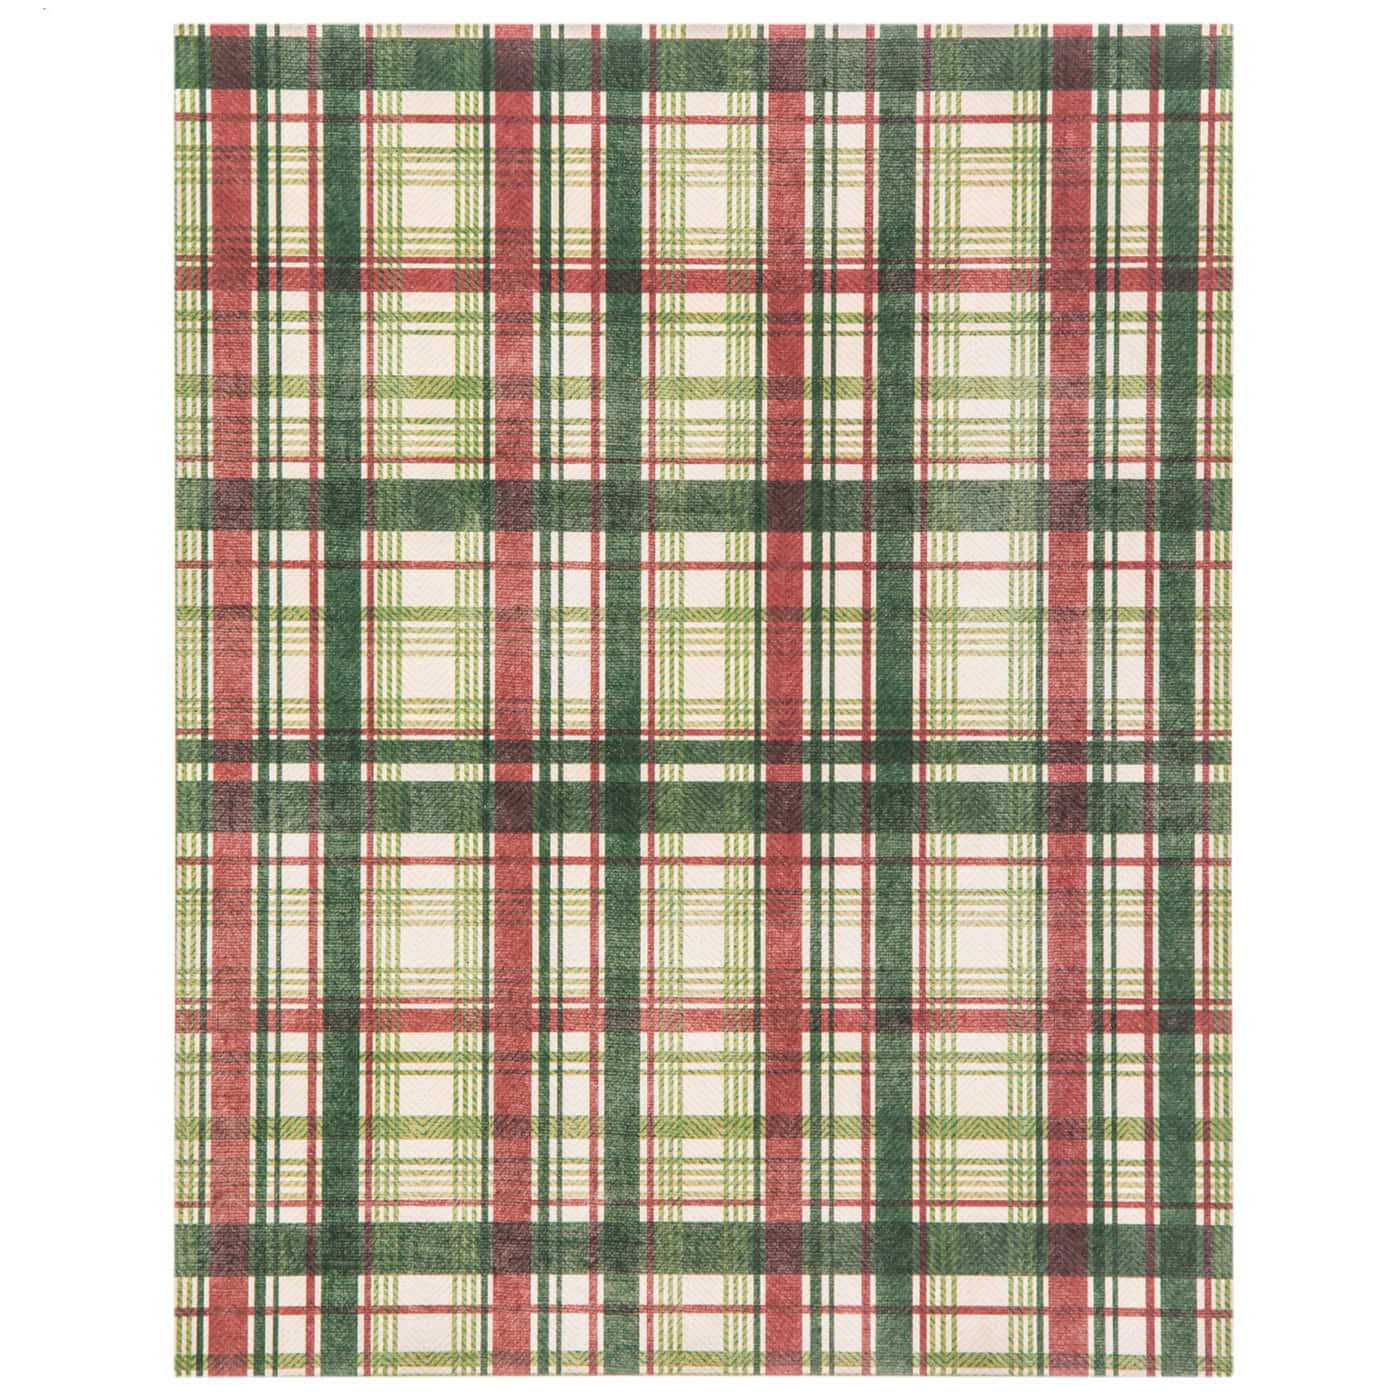 Spread festive holiday cheer this season with a plaid Christmas background